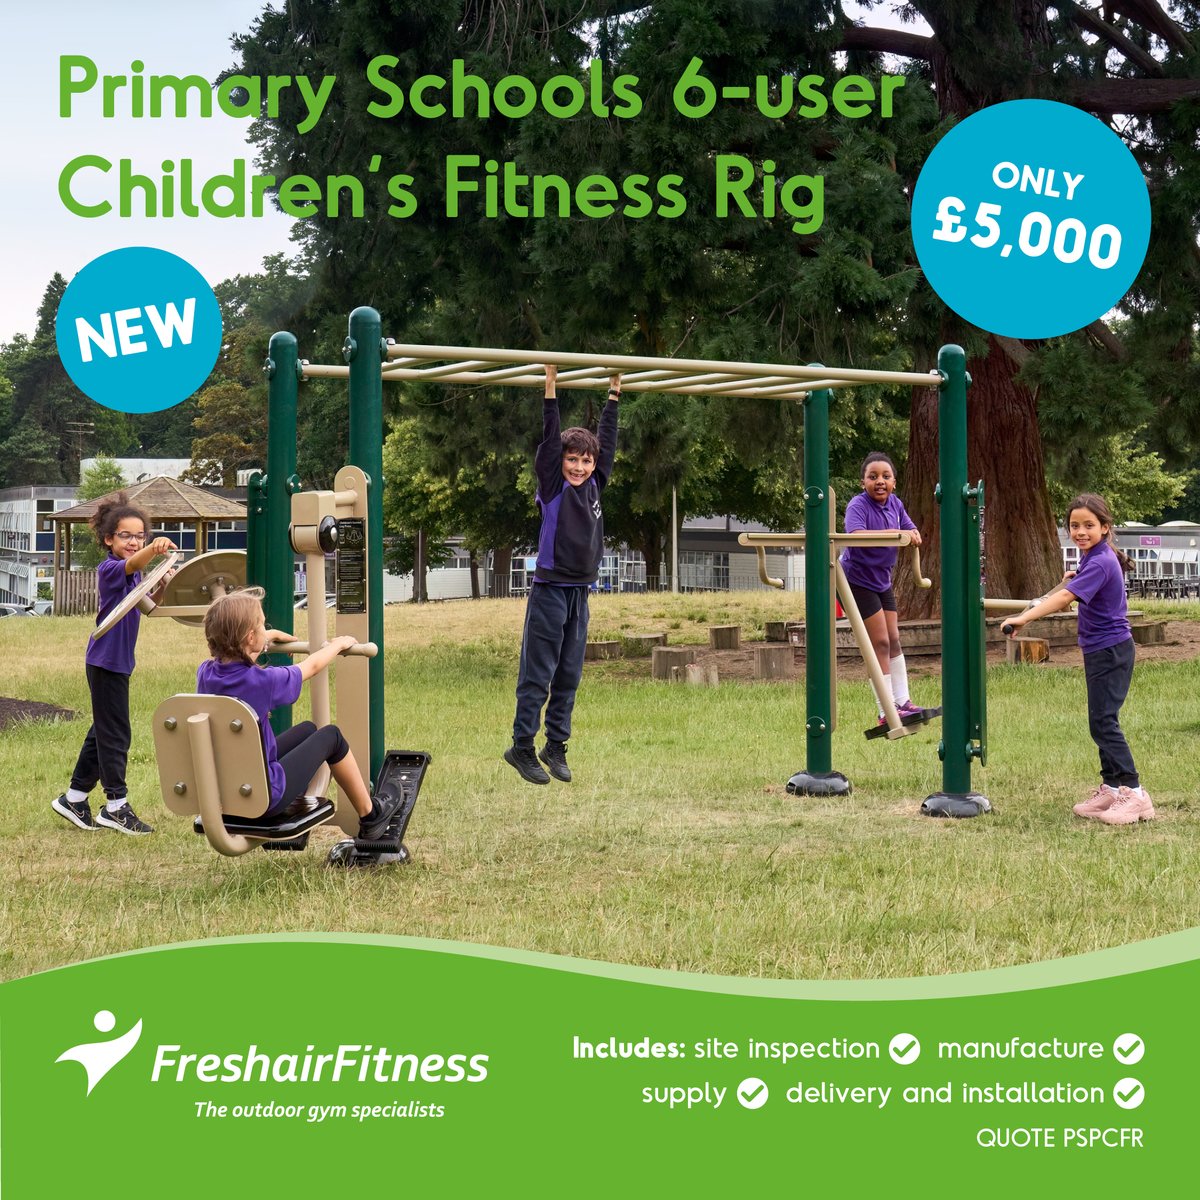 CHILDREN’S FITNESS RIG This package includes 5 Fitness Stations: - Air Skier - Monkey Bars - Seated Leg Press - T’ai Chi Spinners - Inclusive Arm Bike Total cost: £5,000 for site inspection, manufacture, supply, delivery and installation. Call 01483 608 860 today.